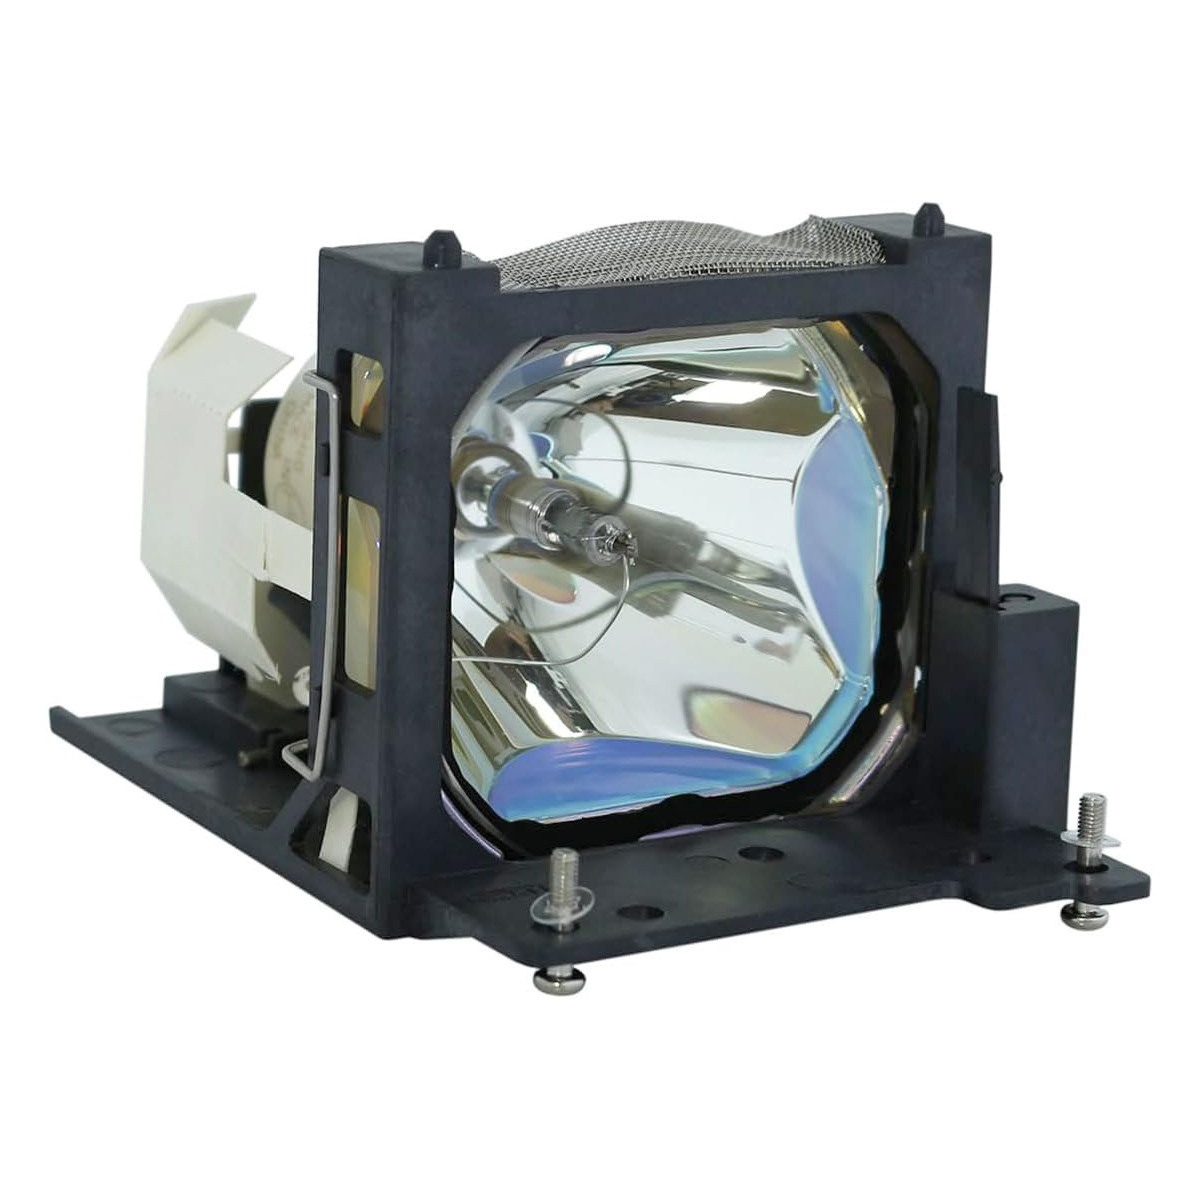 Replacement Projector lamp 78-6969-9463-7 For 3M MP7640i MP7640iA